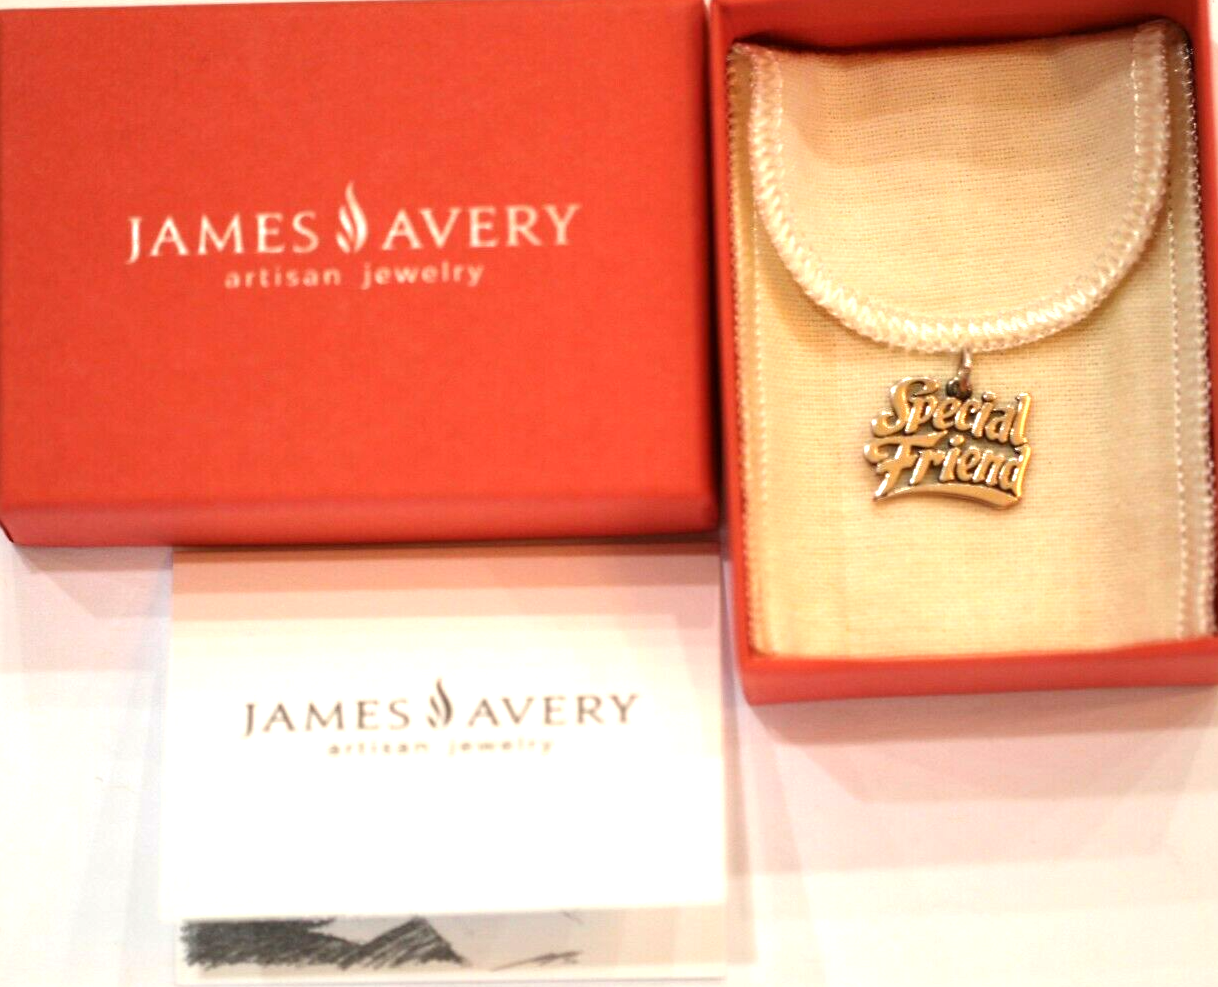 *JAMES AVERY*  R E T I R E D  Sterling Silver Special Friend Charm